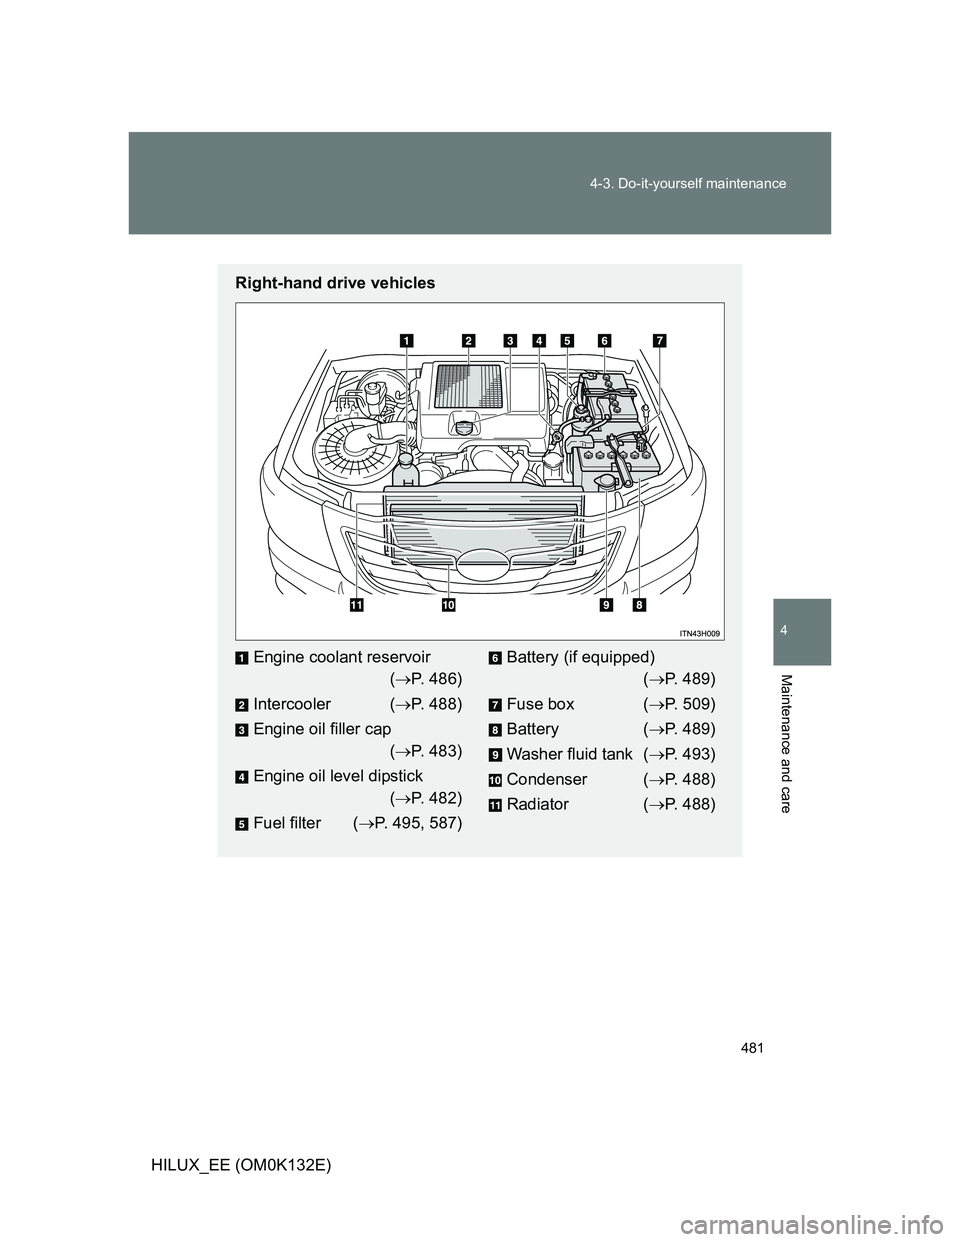 TOYOTA HILUX 2012  Owners Manual (in English) 481 4-3. Do-it-yourself maintenance
4
Maintenance and care
HILUX_EE (OM0K132E)
Right-hand drive vehicles
Engine coolant reservoir 
(P. 486)
Intercooler (P. 488)
Engine oil filler cap 
(P. 483